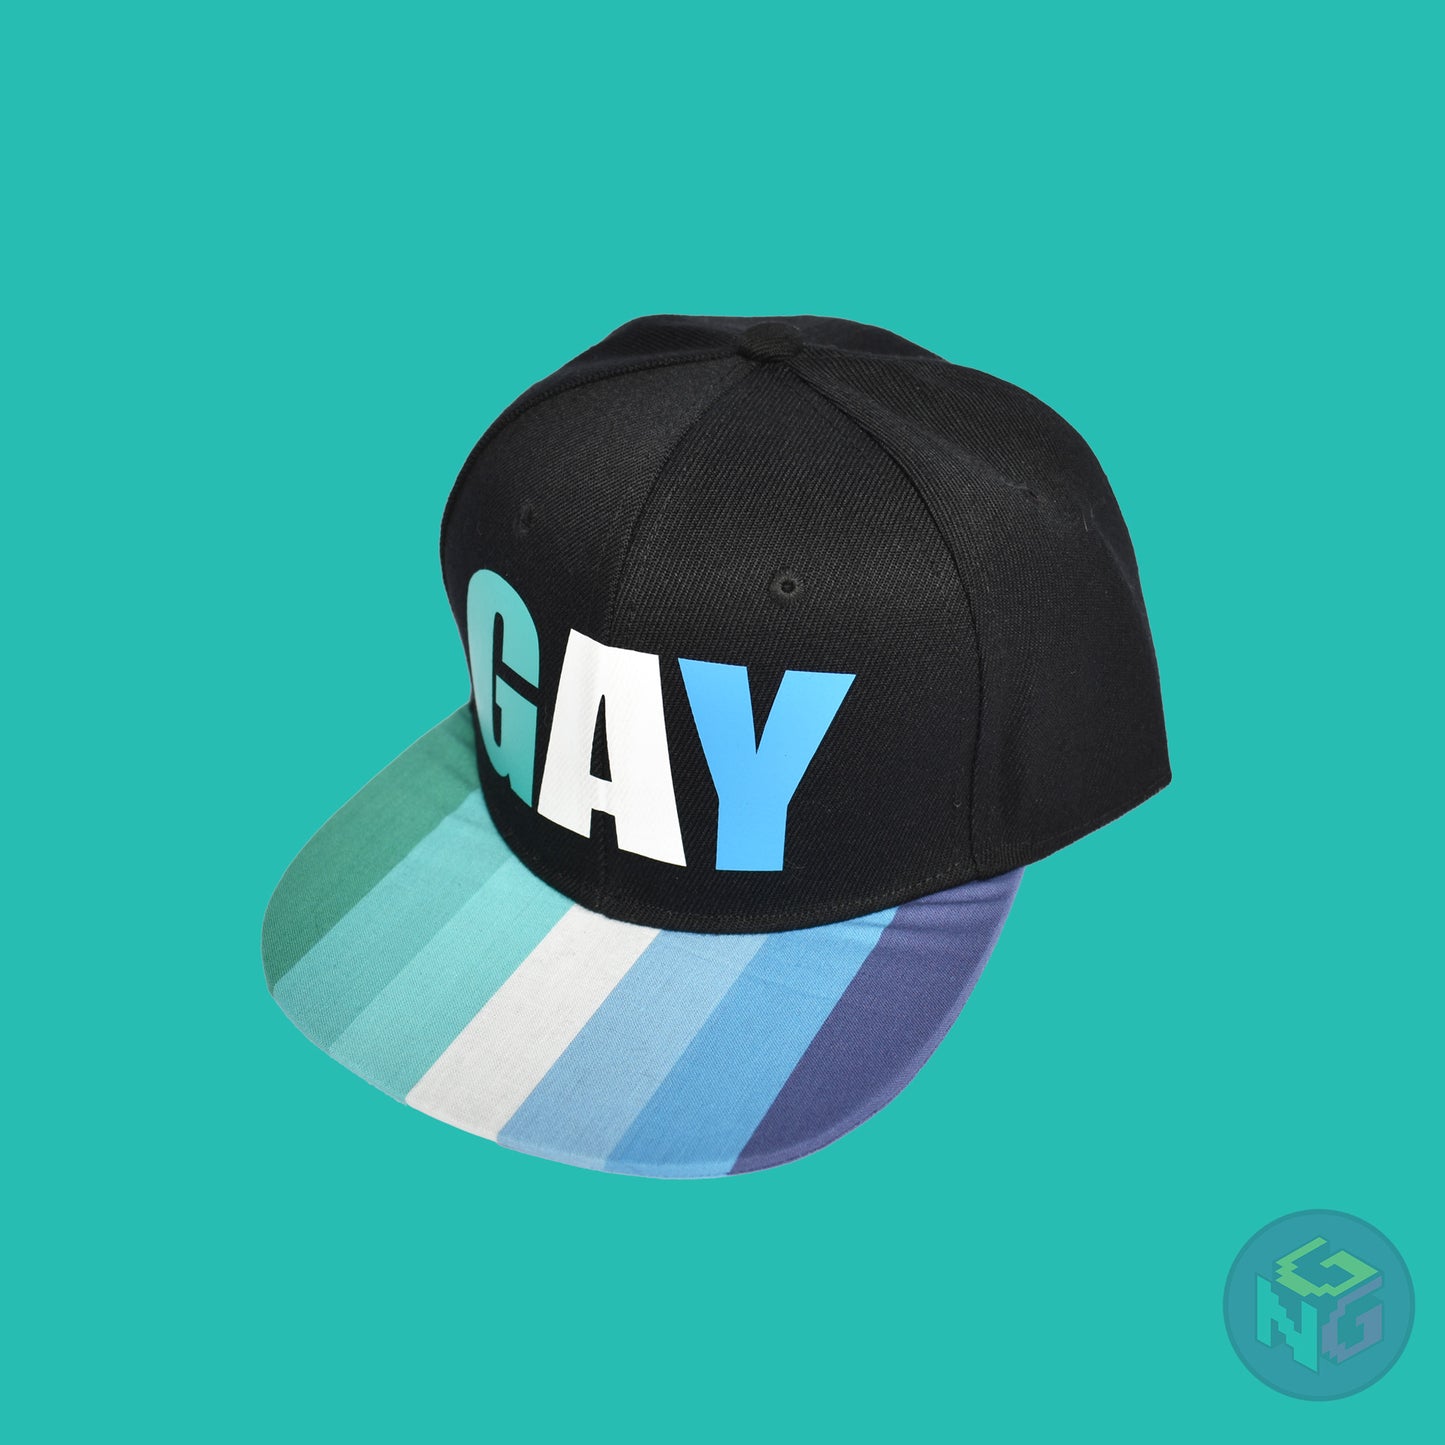 Black flat bill snapback hat. The brim has the gay pride flag on both sides and the front of the hat has the word “GAY” in turquoises, blues, and white. Front left view